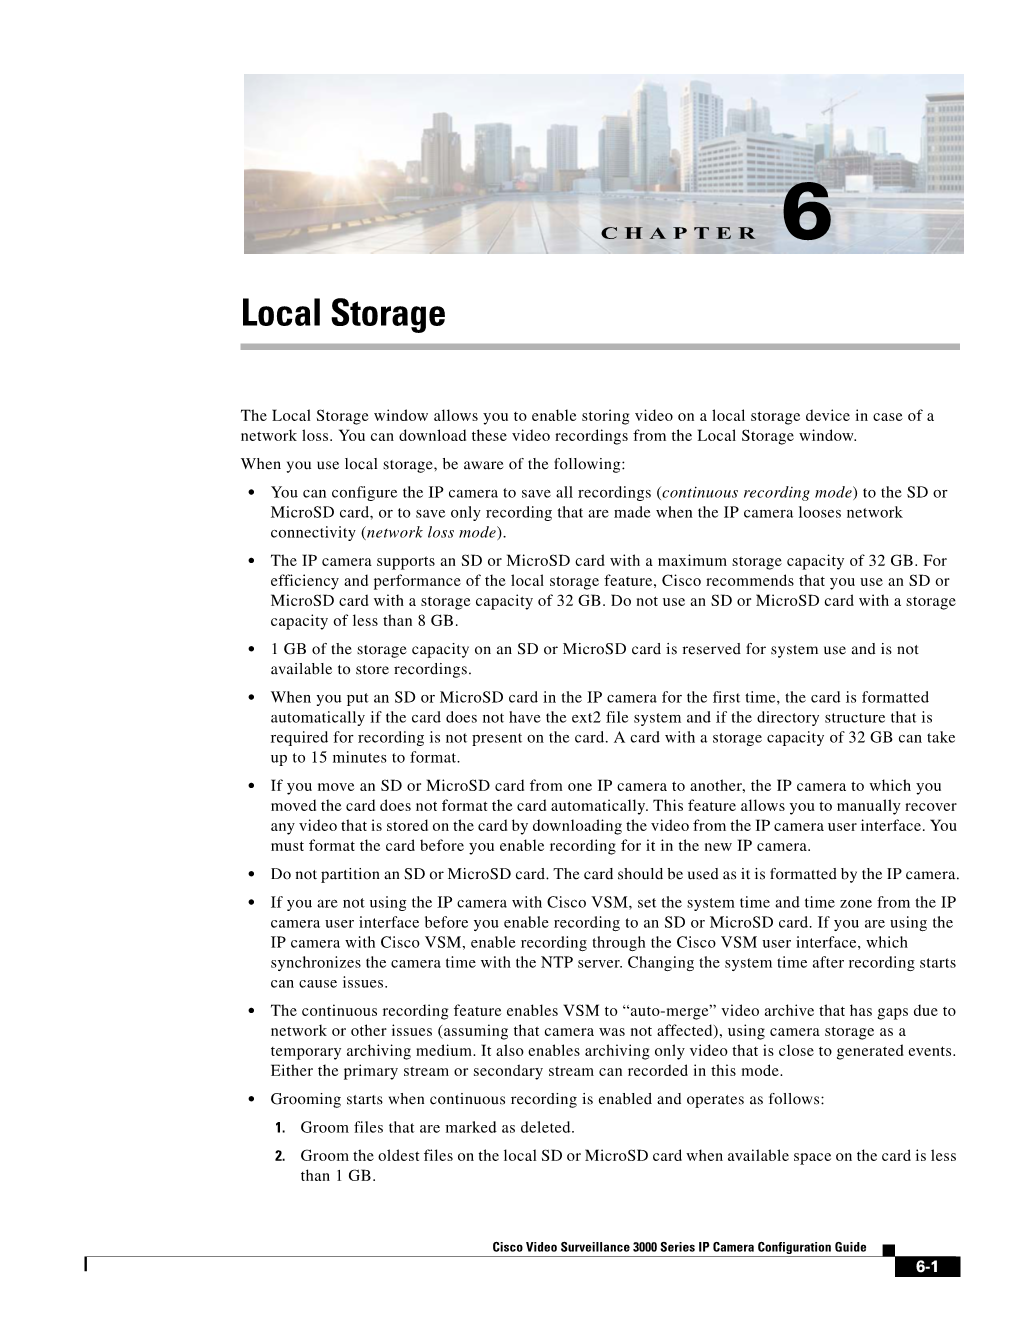 Chapter 6, “Local Storage”